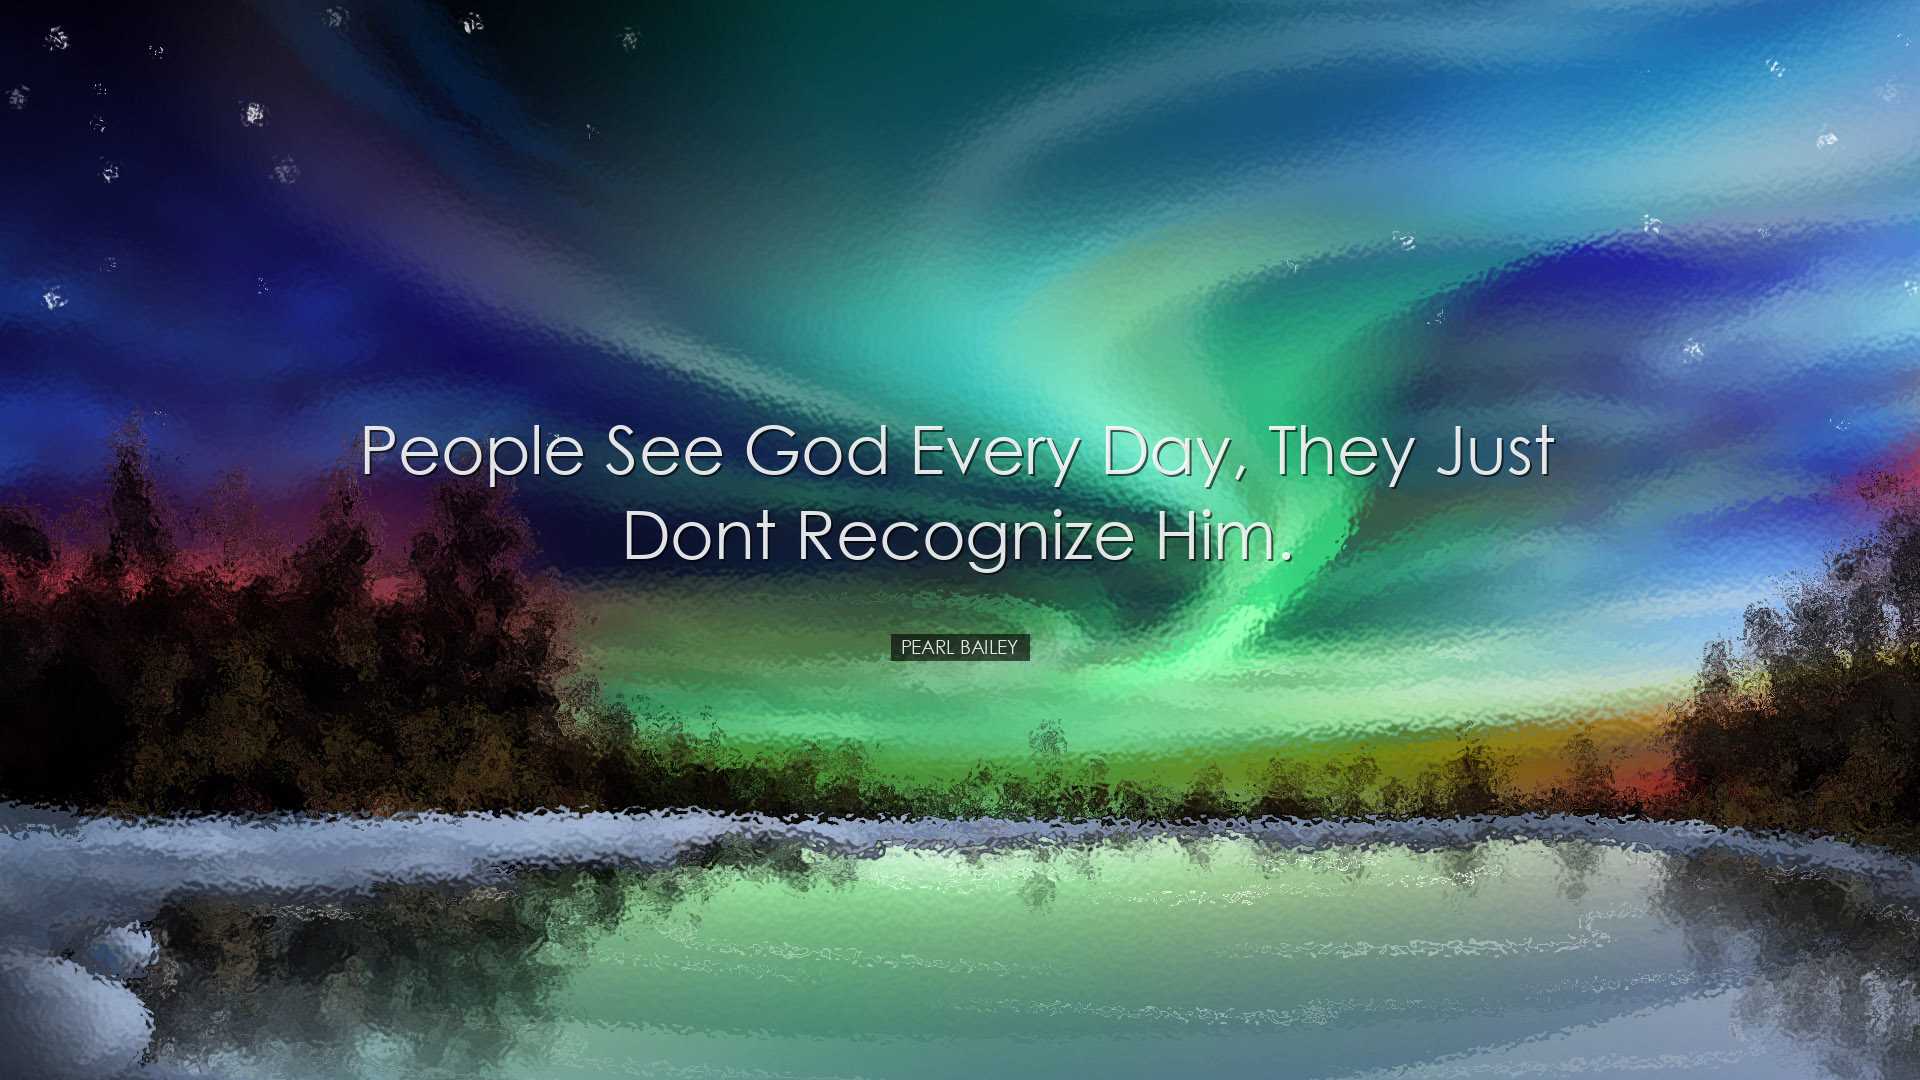 People see God every day, they just dont recognize him. - Pearl Ba